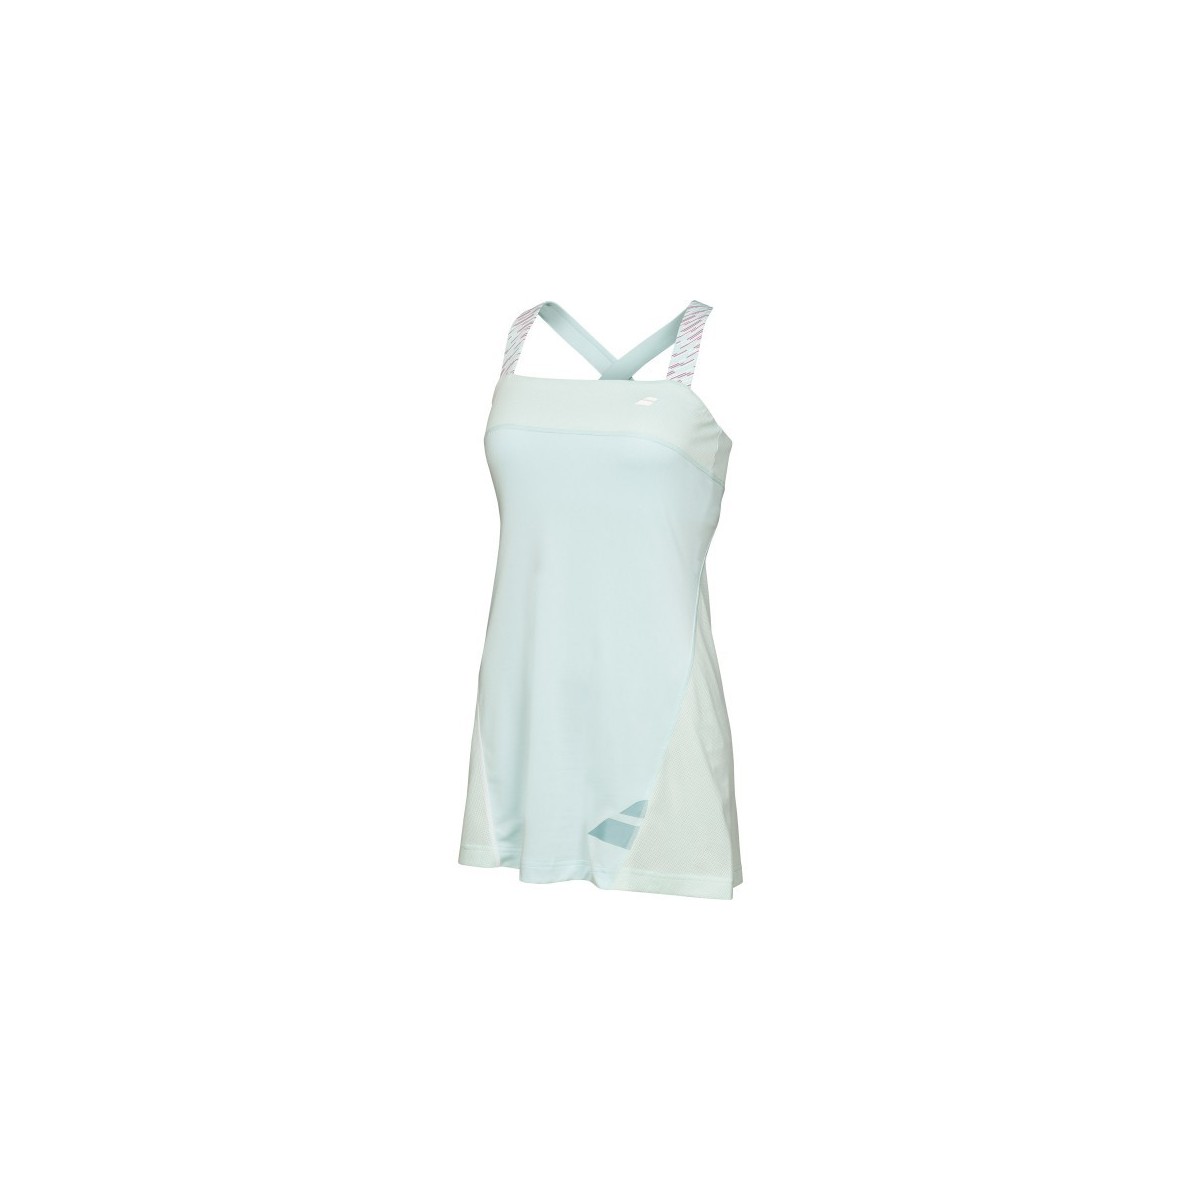 Strap Dress girl Babolat Mineral washed performance 2016